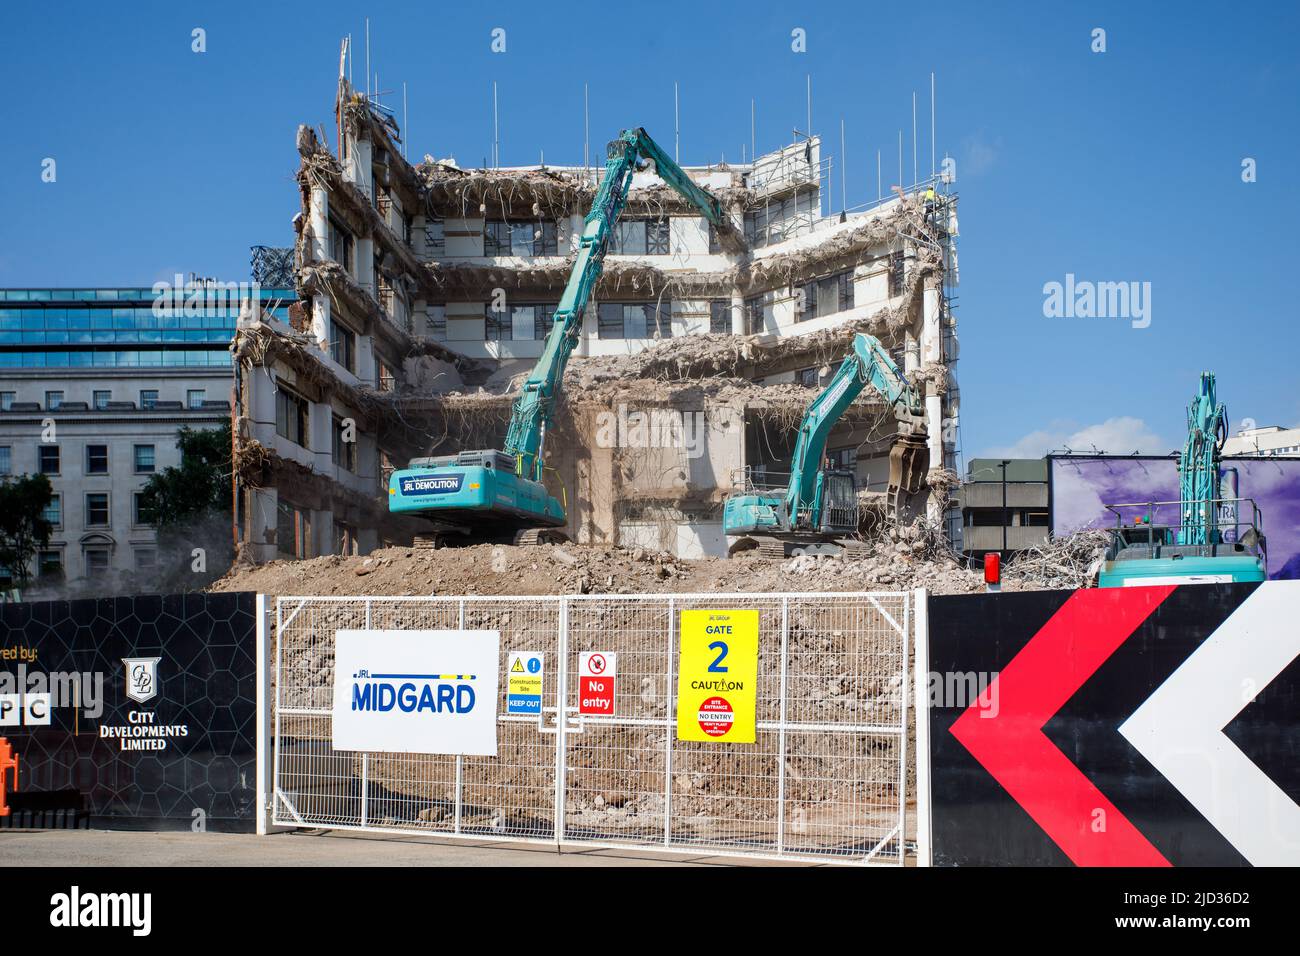 Buildings being demolished in Paradise Circus, Birmingham, making way for new developments. Stock Photo